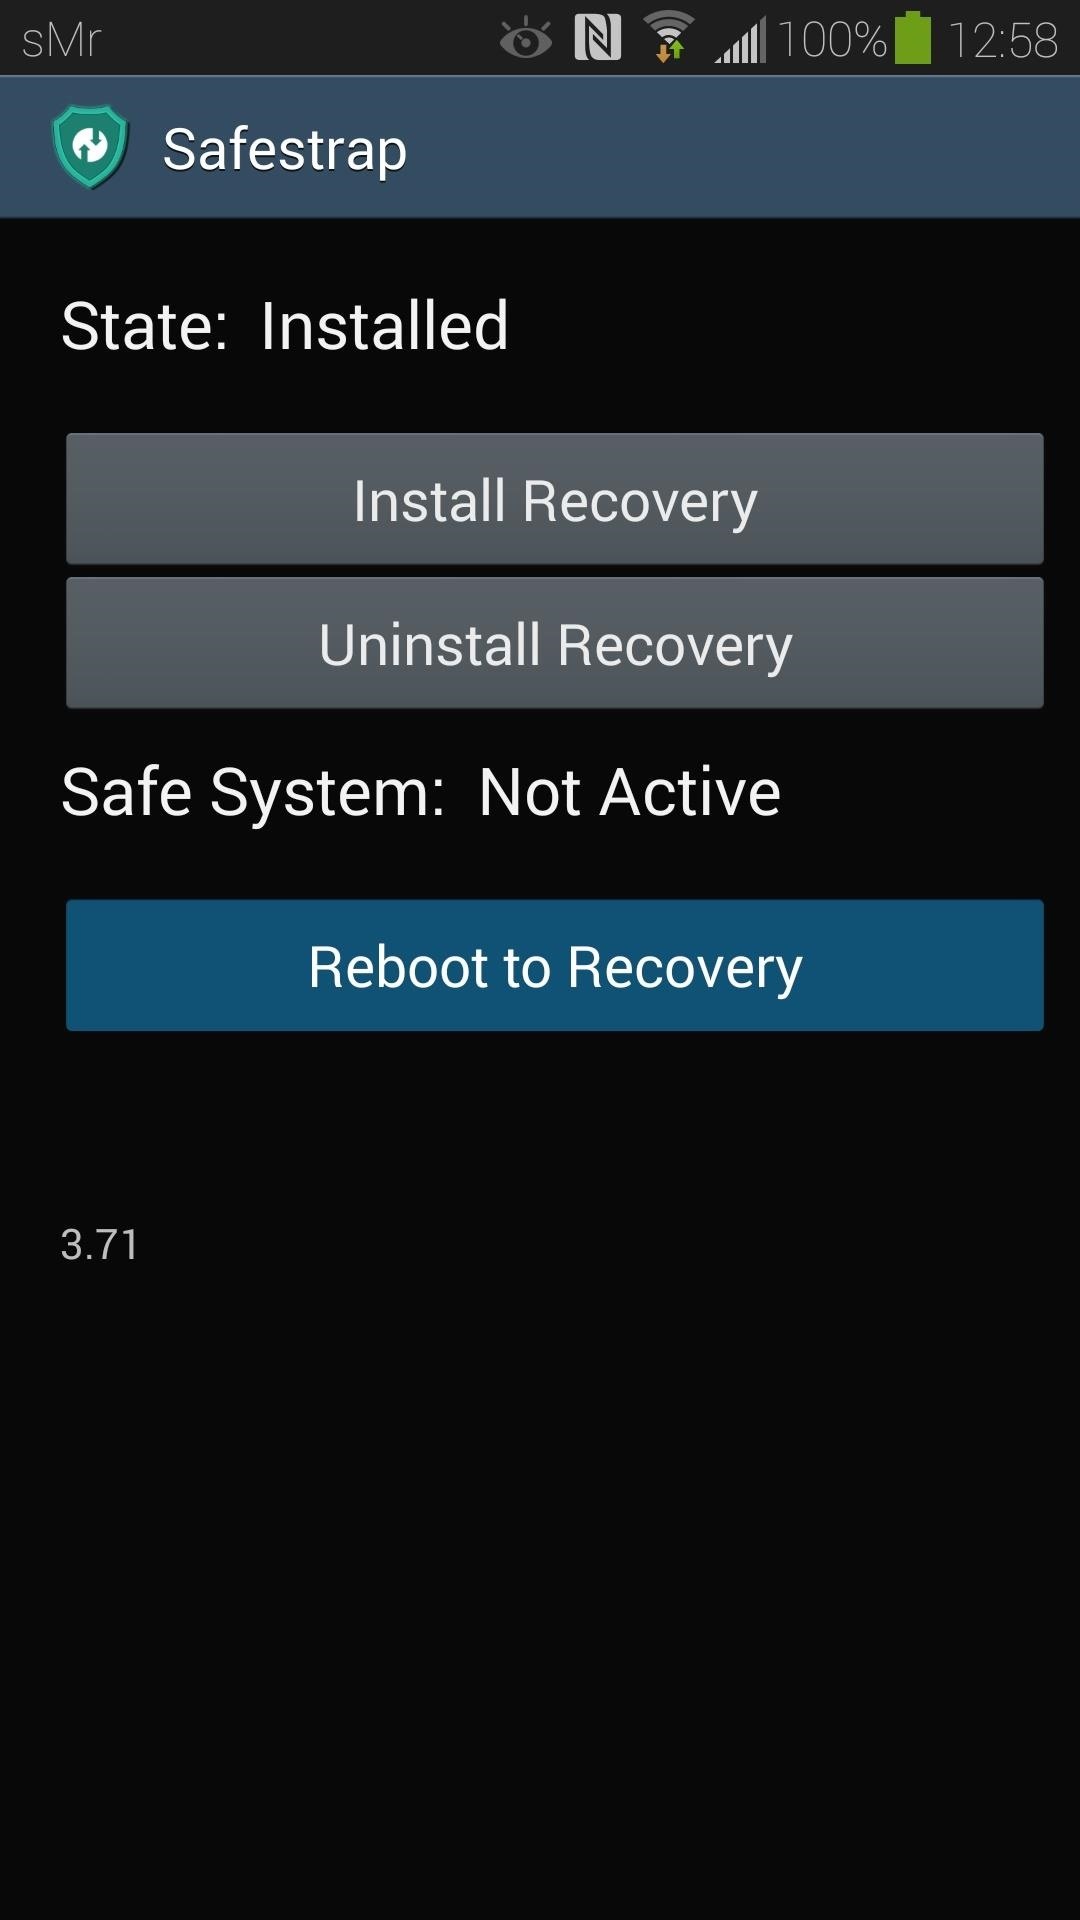 How to Install a Custom Recovery & New ROM on Your Bootloader-Locked Samsung Galaxy S4